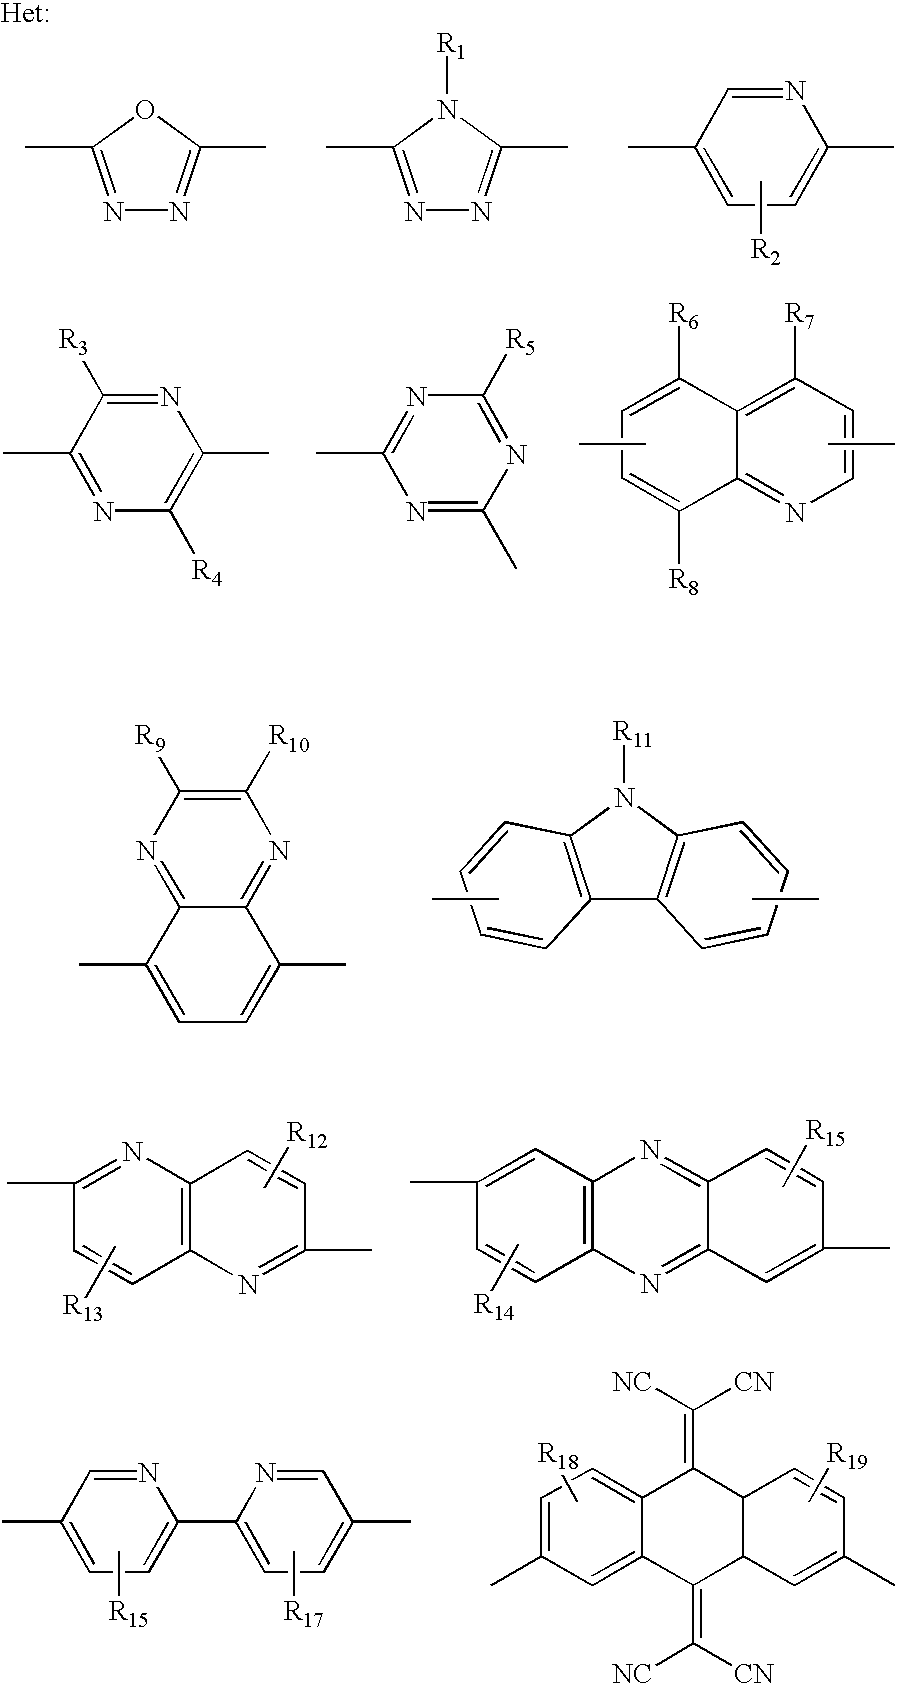 Polymers for use in optical devices